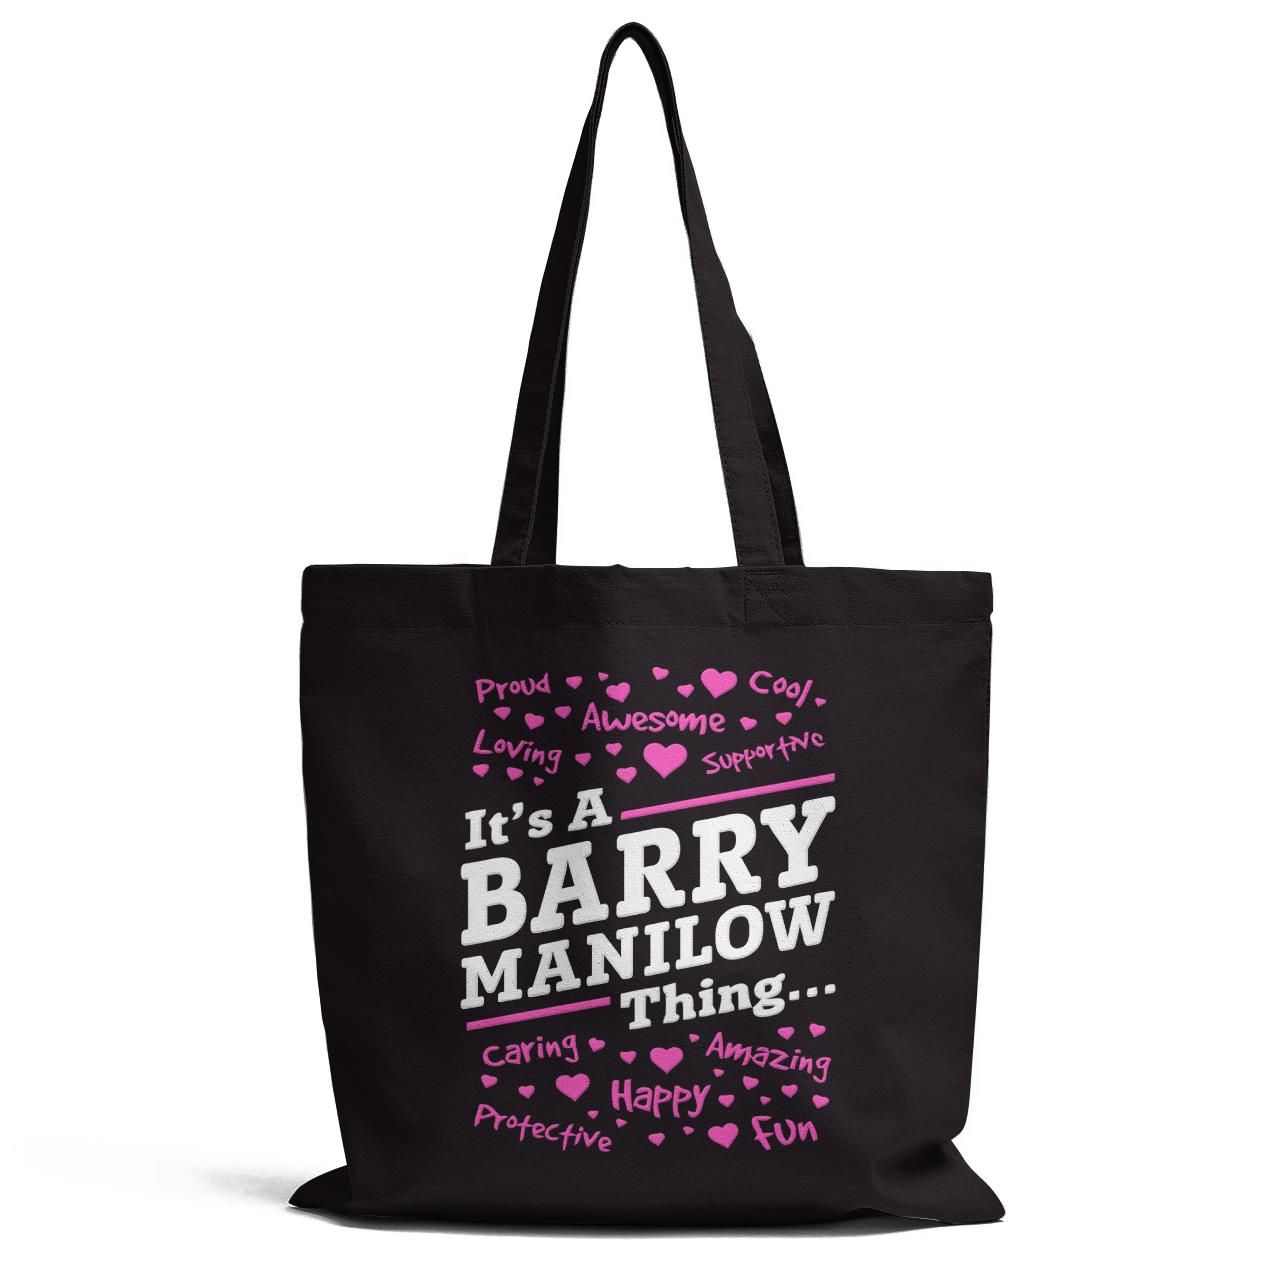 It's A Barry Manilow Thing Tote Bag PANCVTB027